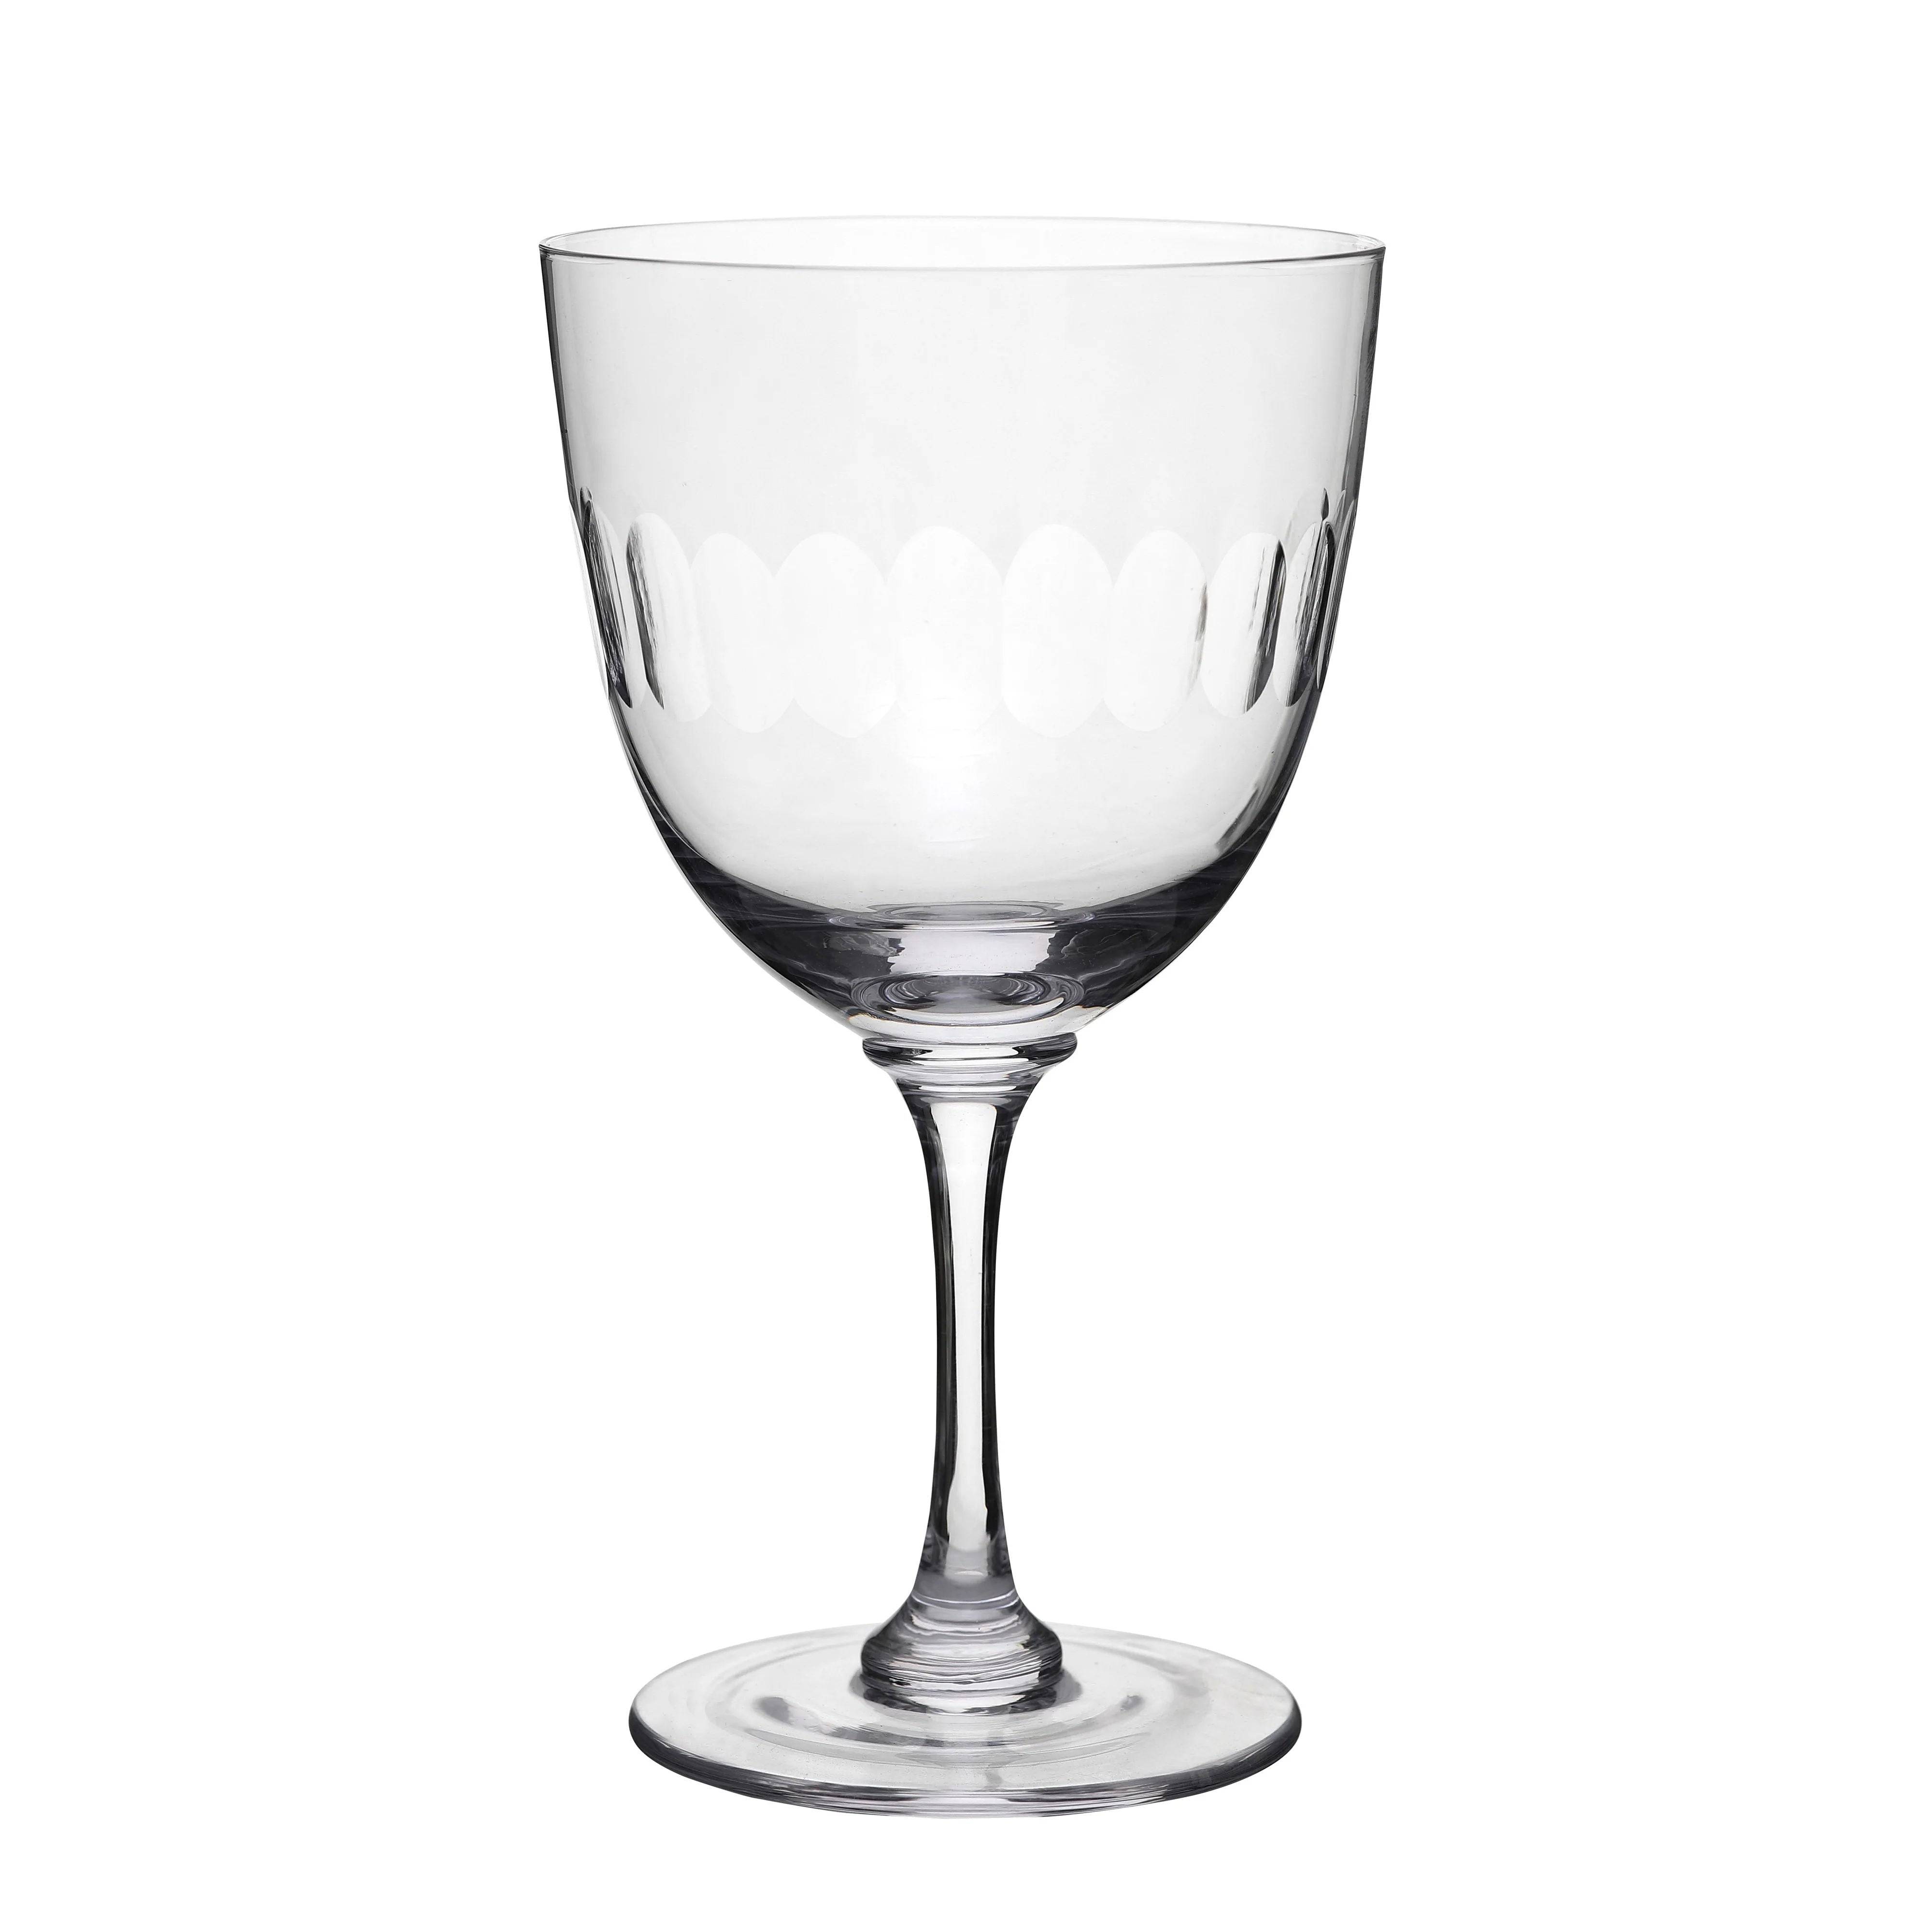 The Vintage List A Set of Four Crystal Highballs with Ovals Design